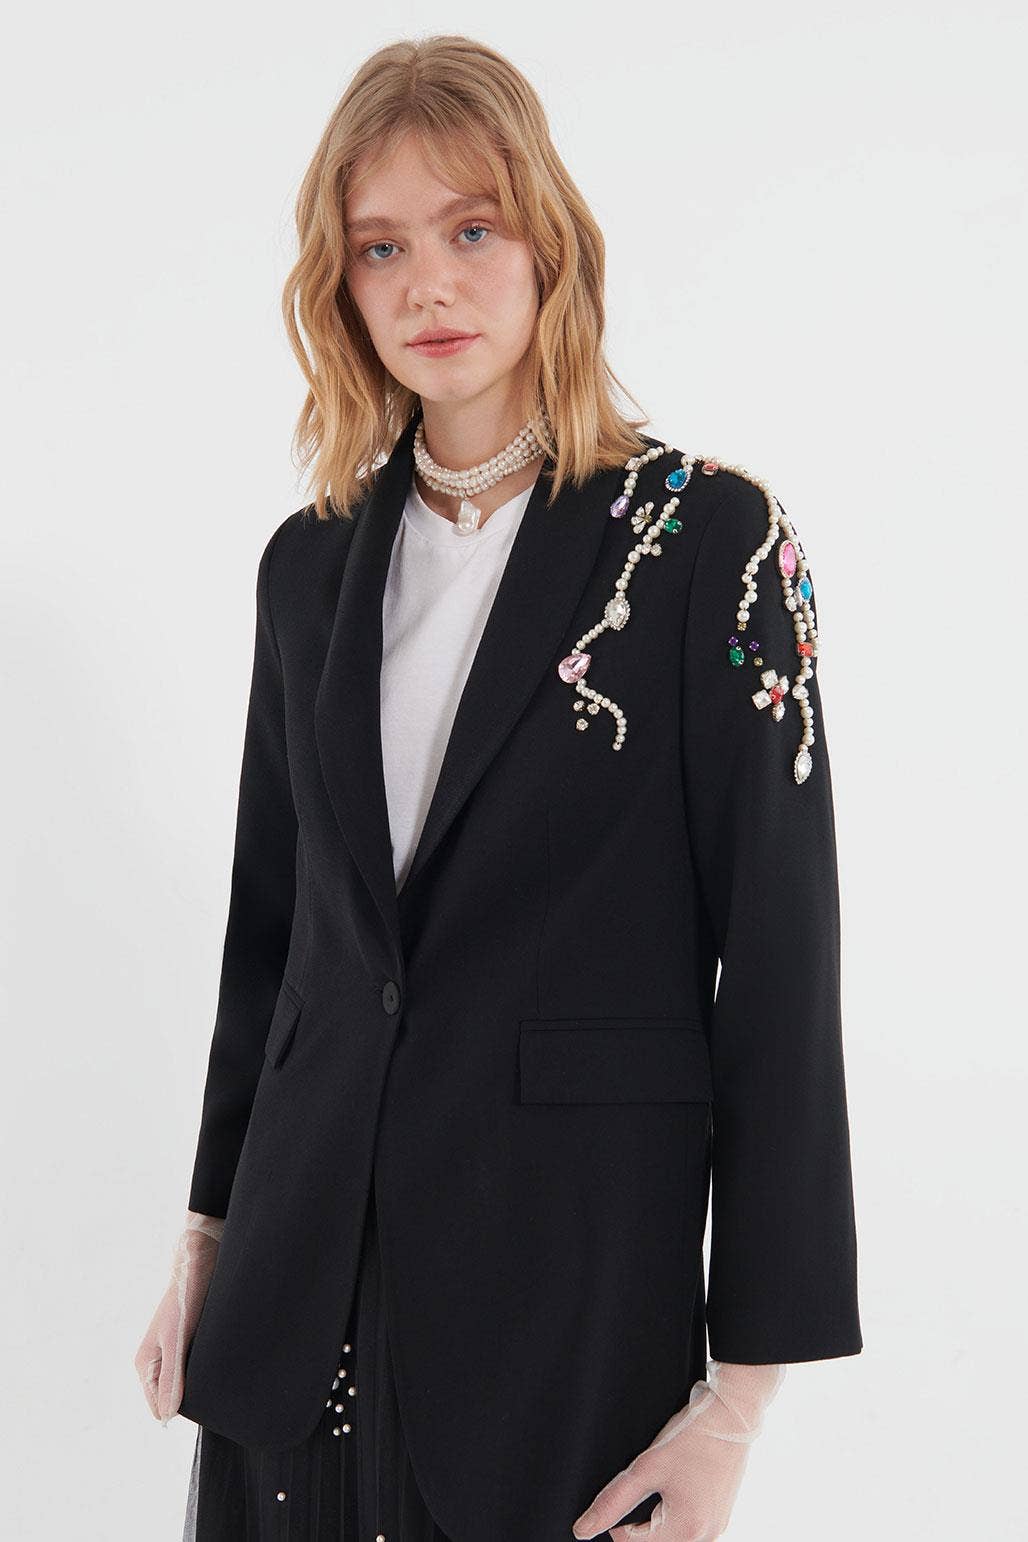 EMBROIDERED COLORFUL STONE DETAIL JACKET BLACK